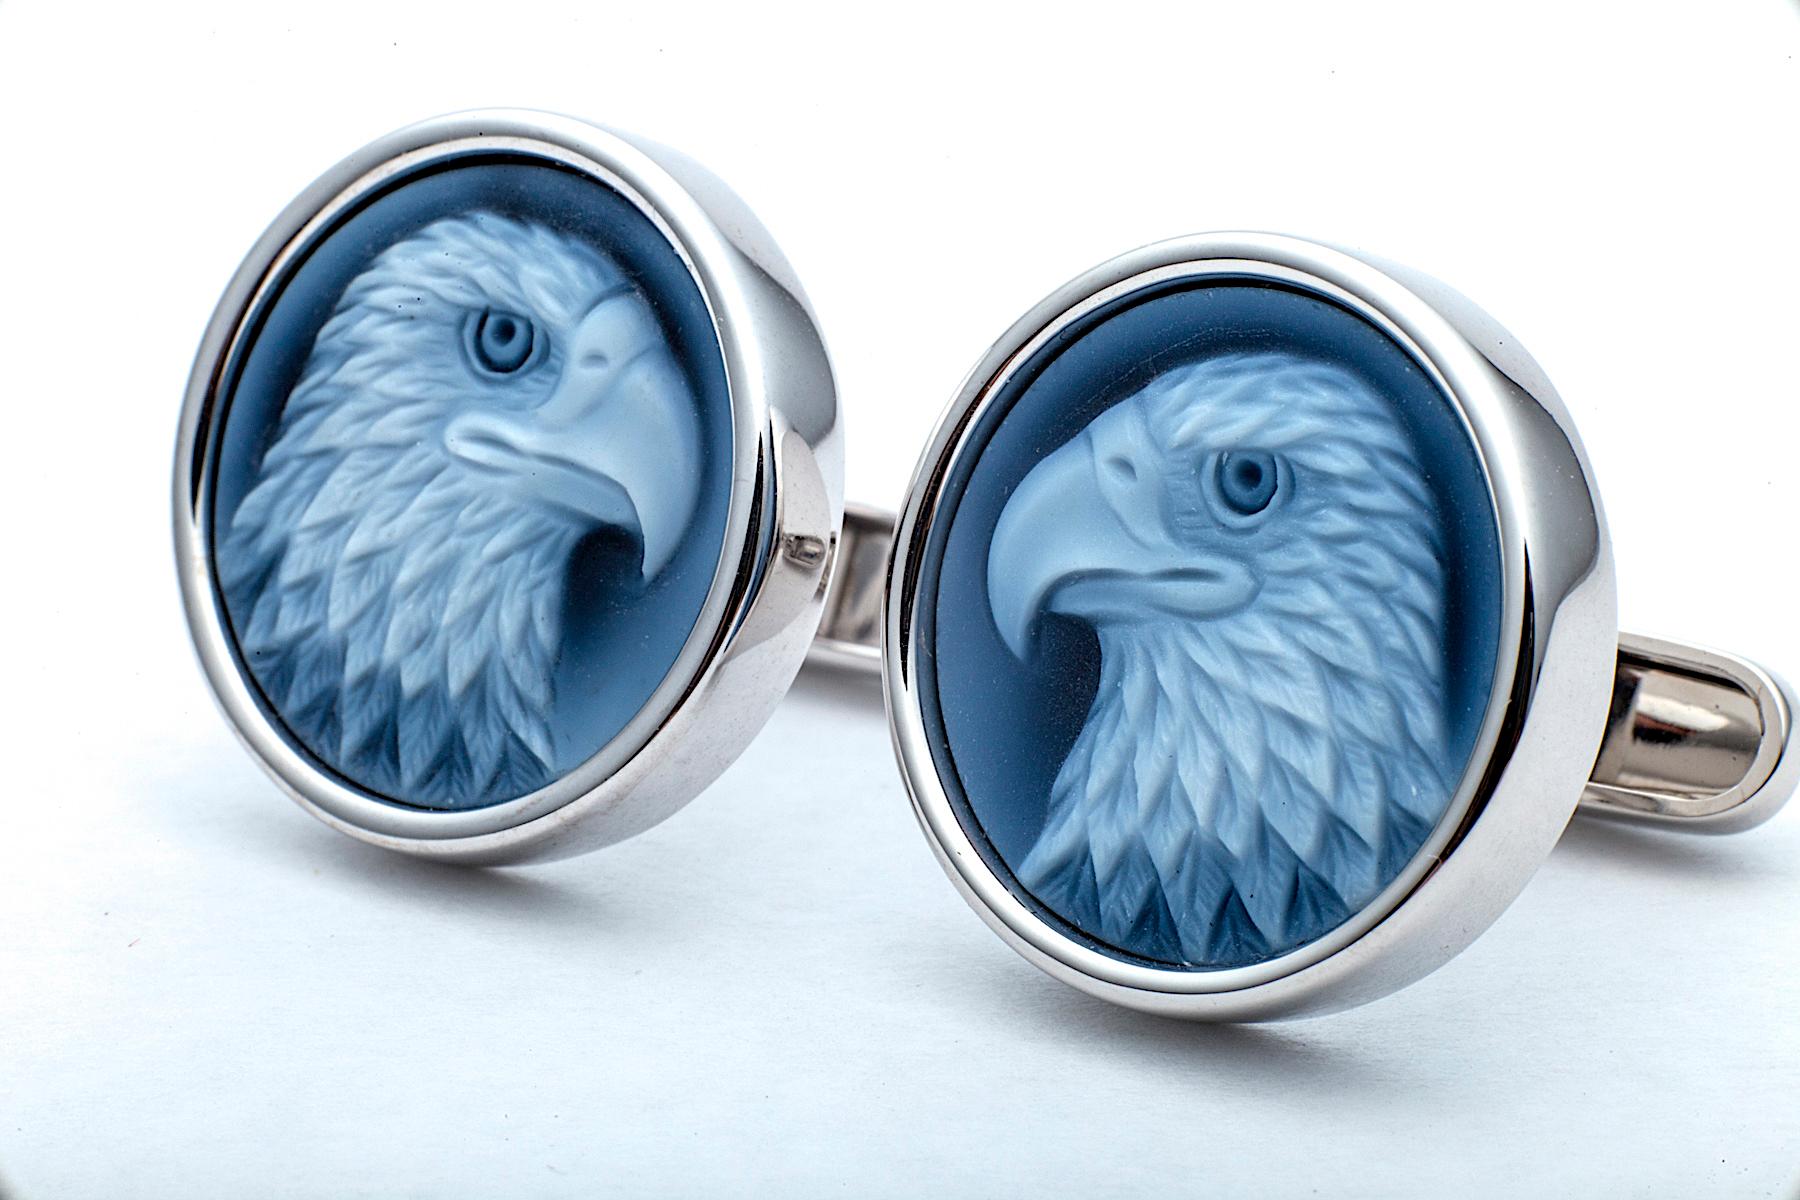 The Bald Eagle, the emblem and national bird of America, symbolizes strength, courage, farsightedness, and immortality.  These hand carved blue agate Eagle head cufflinks, pay respect to this majestic bird with an incredibly detailed and handsome